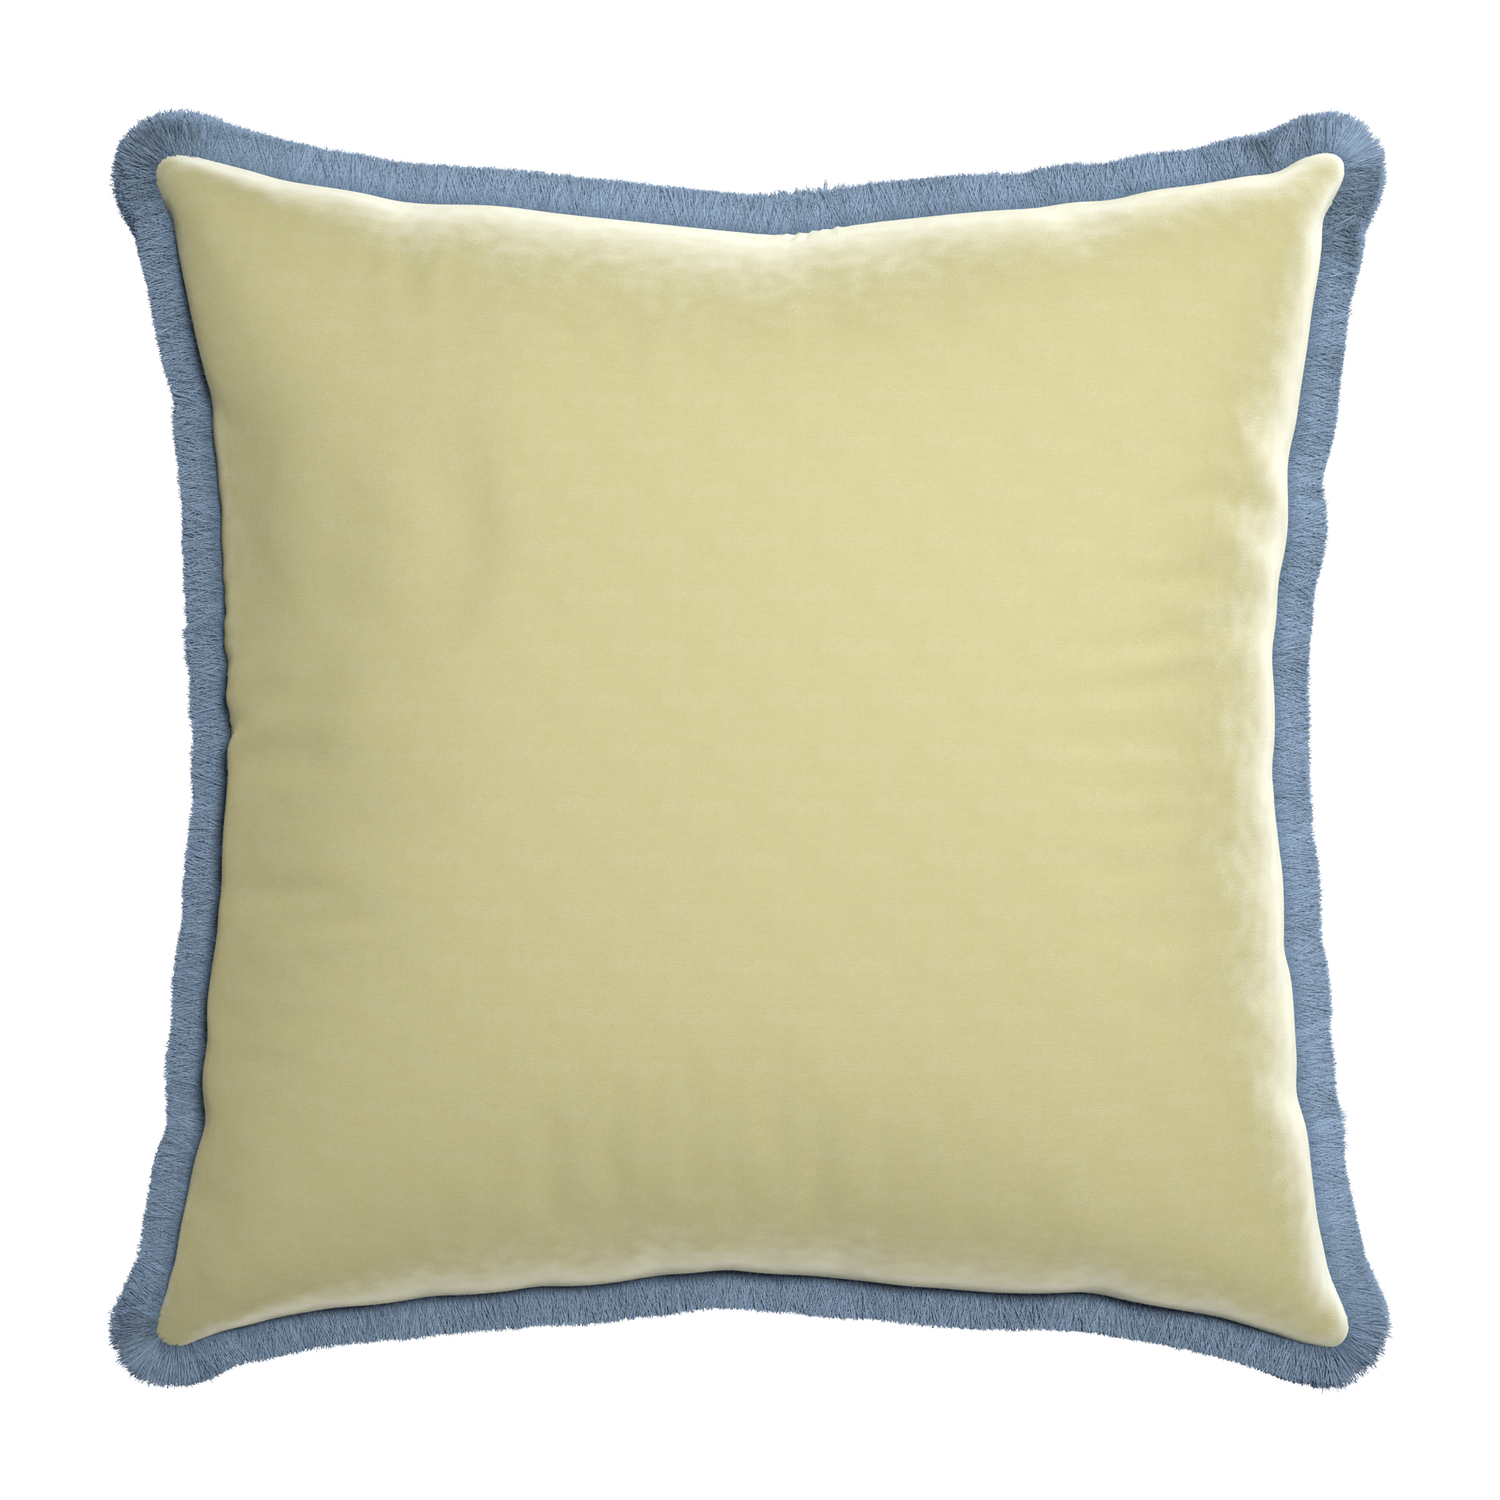 square light green pillow with sky blue fringe